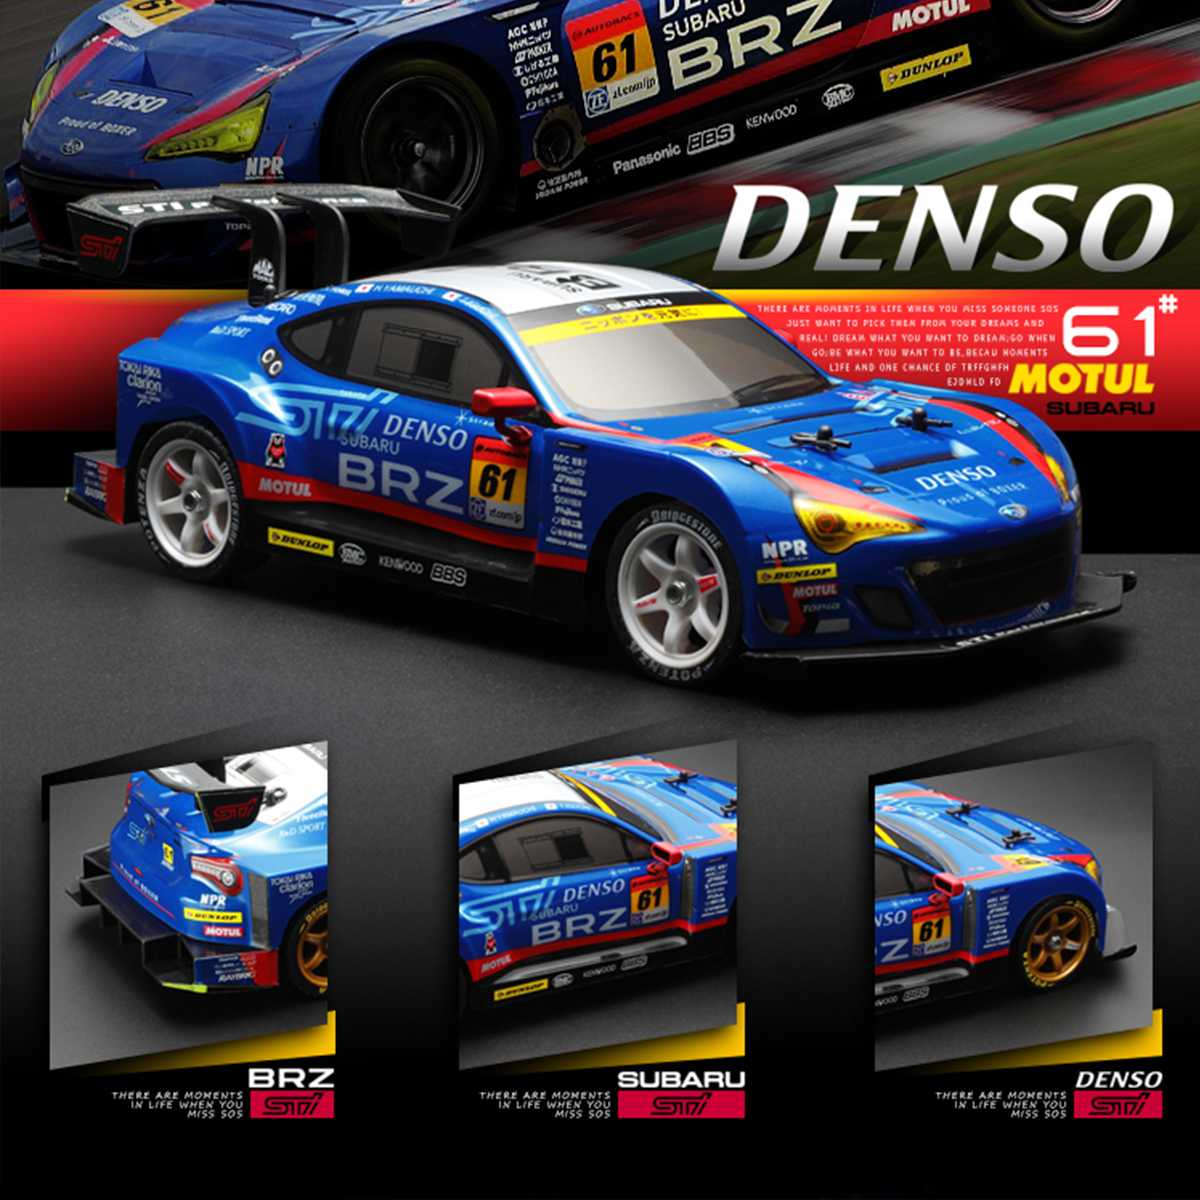 116 RC Car For GTR/Lexus 2.4G Off Road 4WD Drift Racing Car Championship Vehicle Remote Control Electronic Kids Hobby Toys от DHgate WW